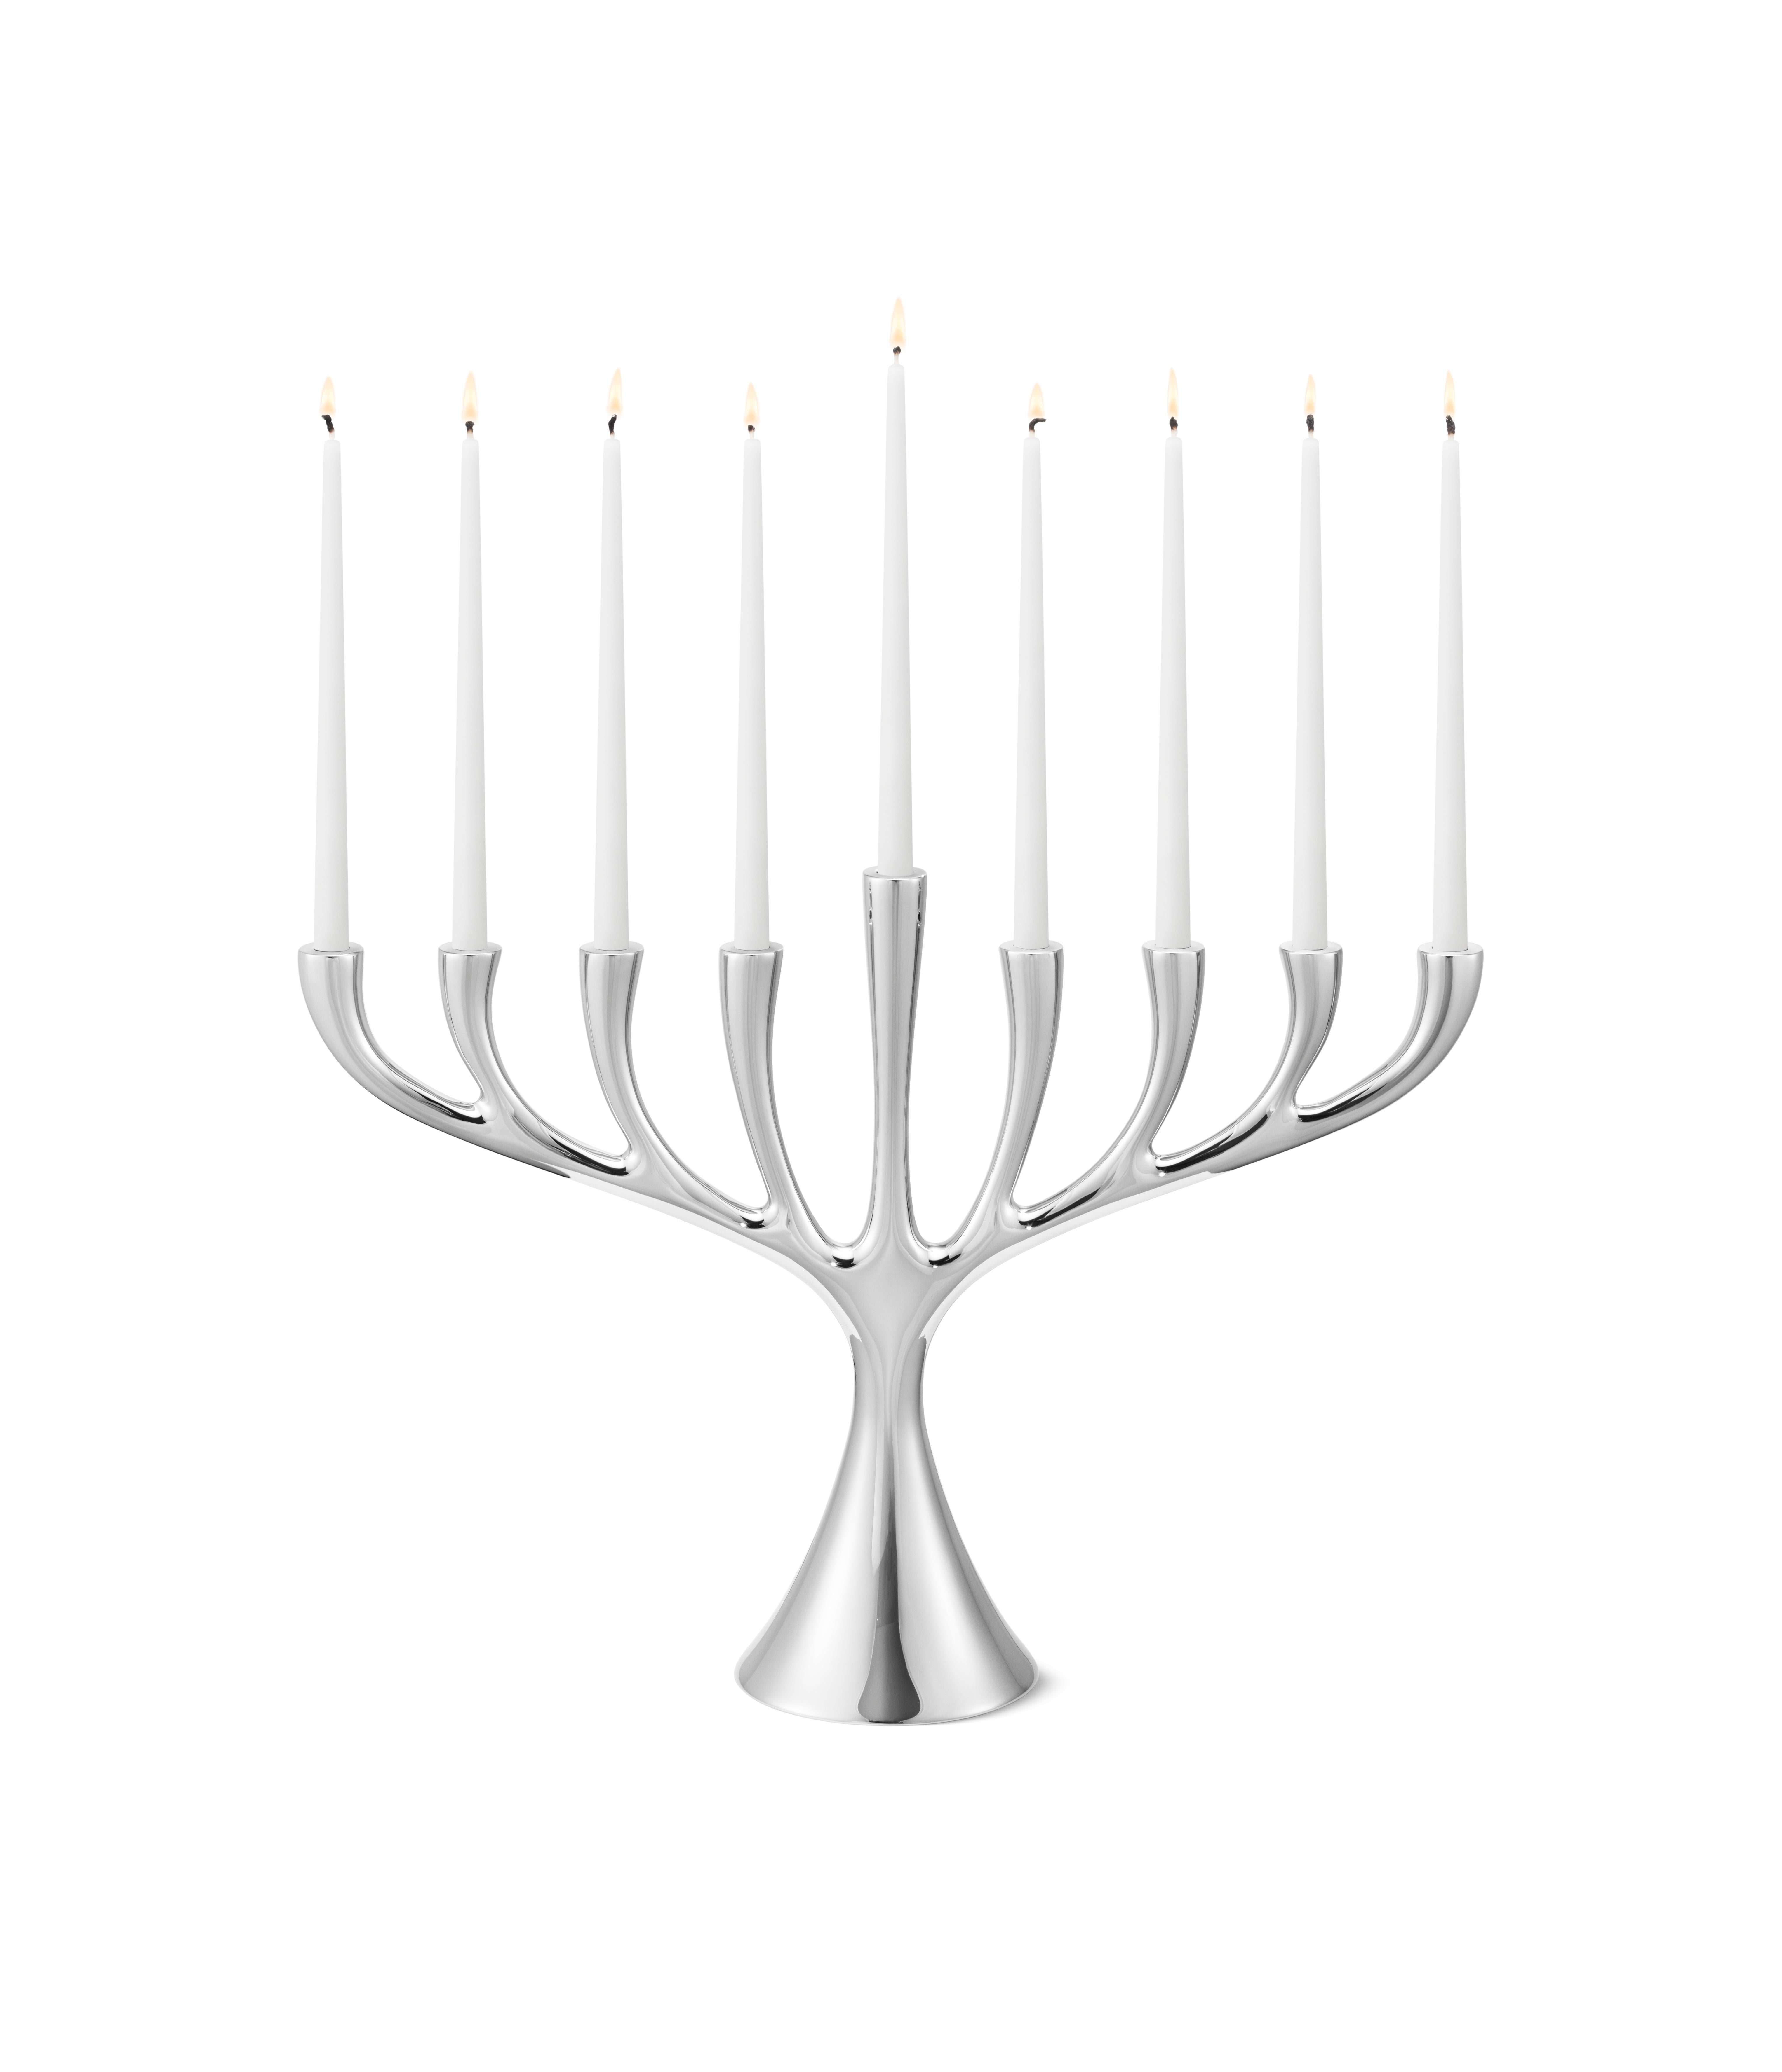 Celebrate Hanukkah with this stunning Scandinavian take on a menorah. Rising from an organic base, the candelabra branch out to display nine tapered candles. It makes a beautiful centrepiece to observe the Festival of Lights with loved ones. 
 
